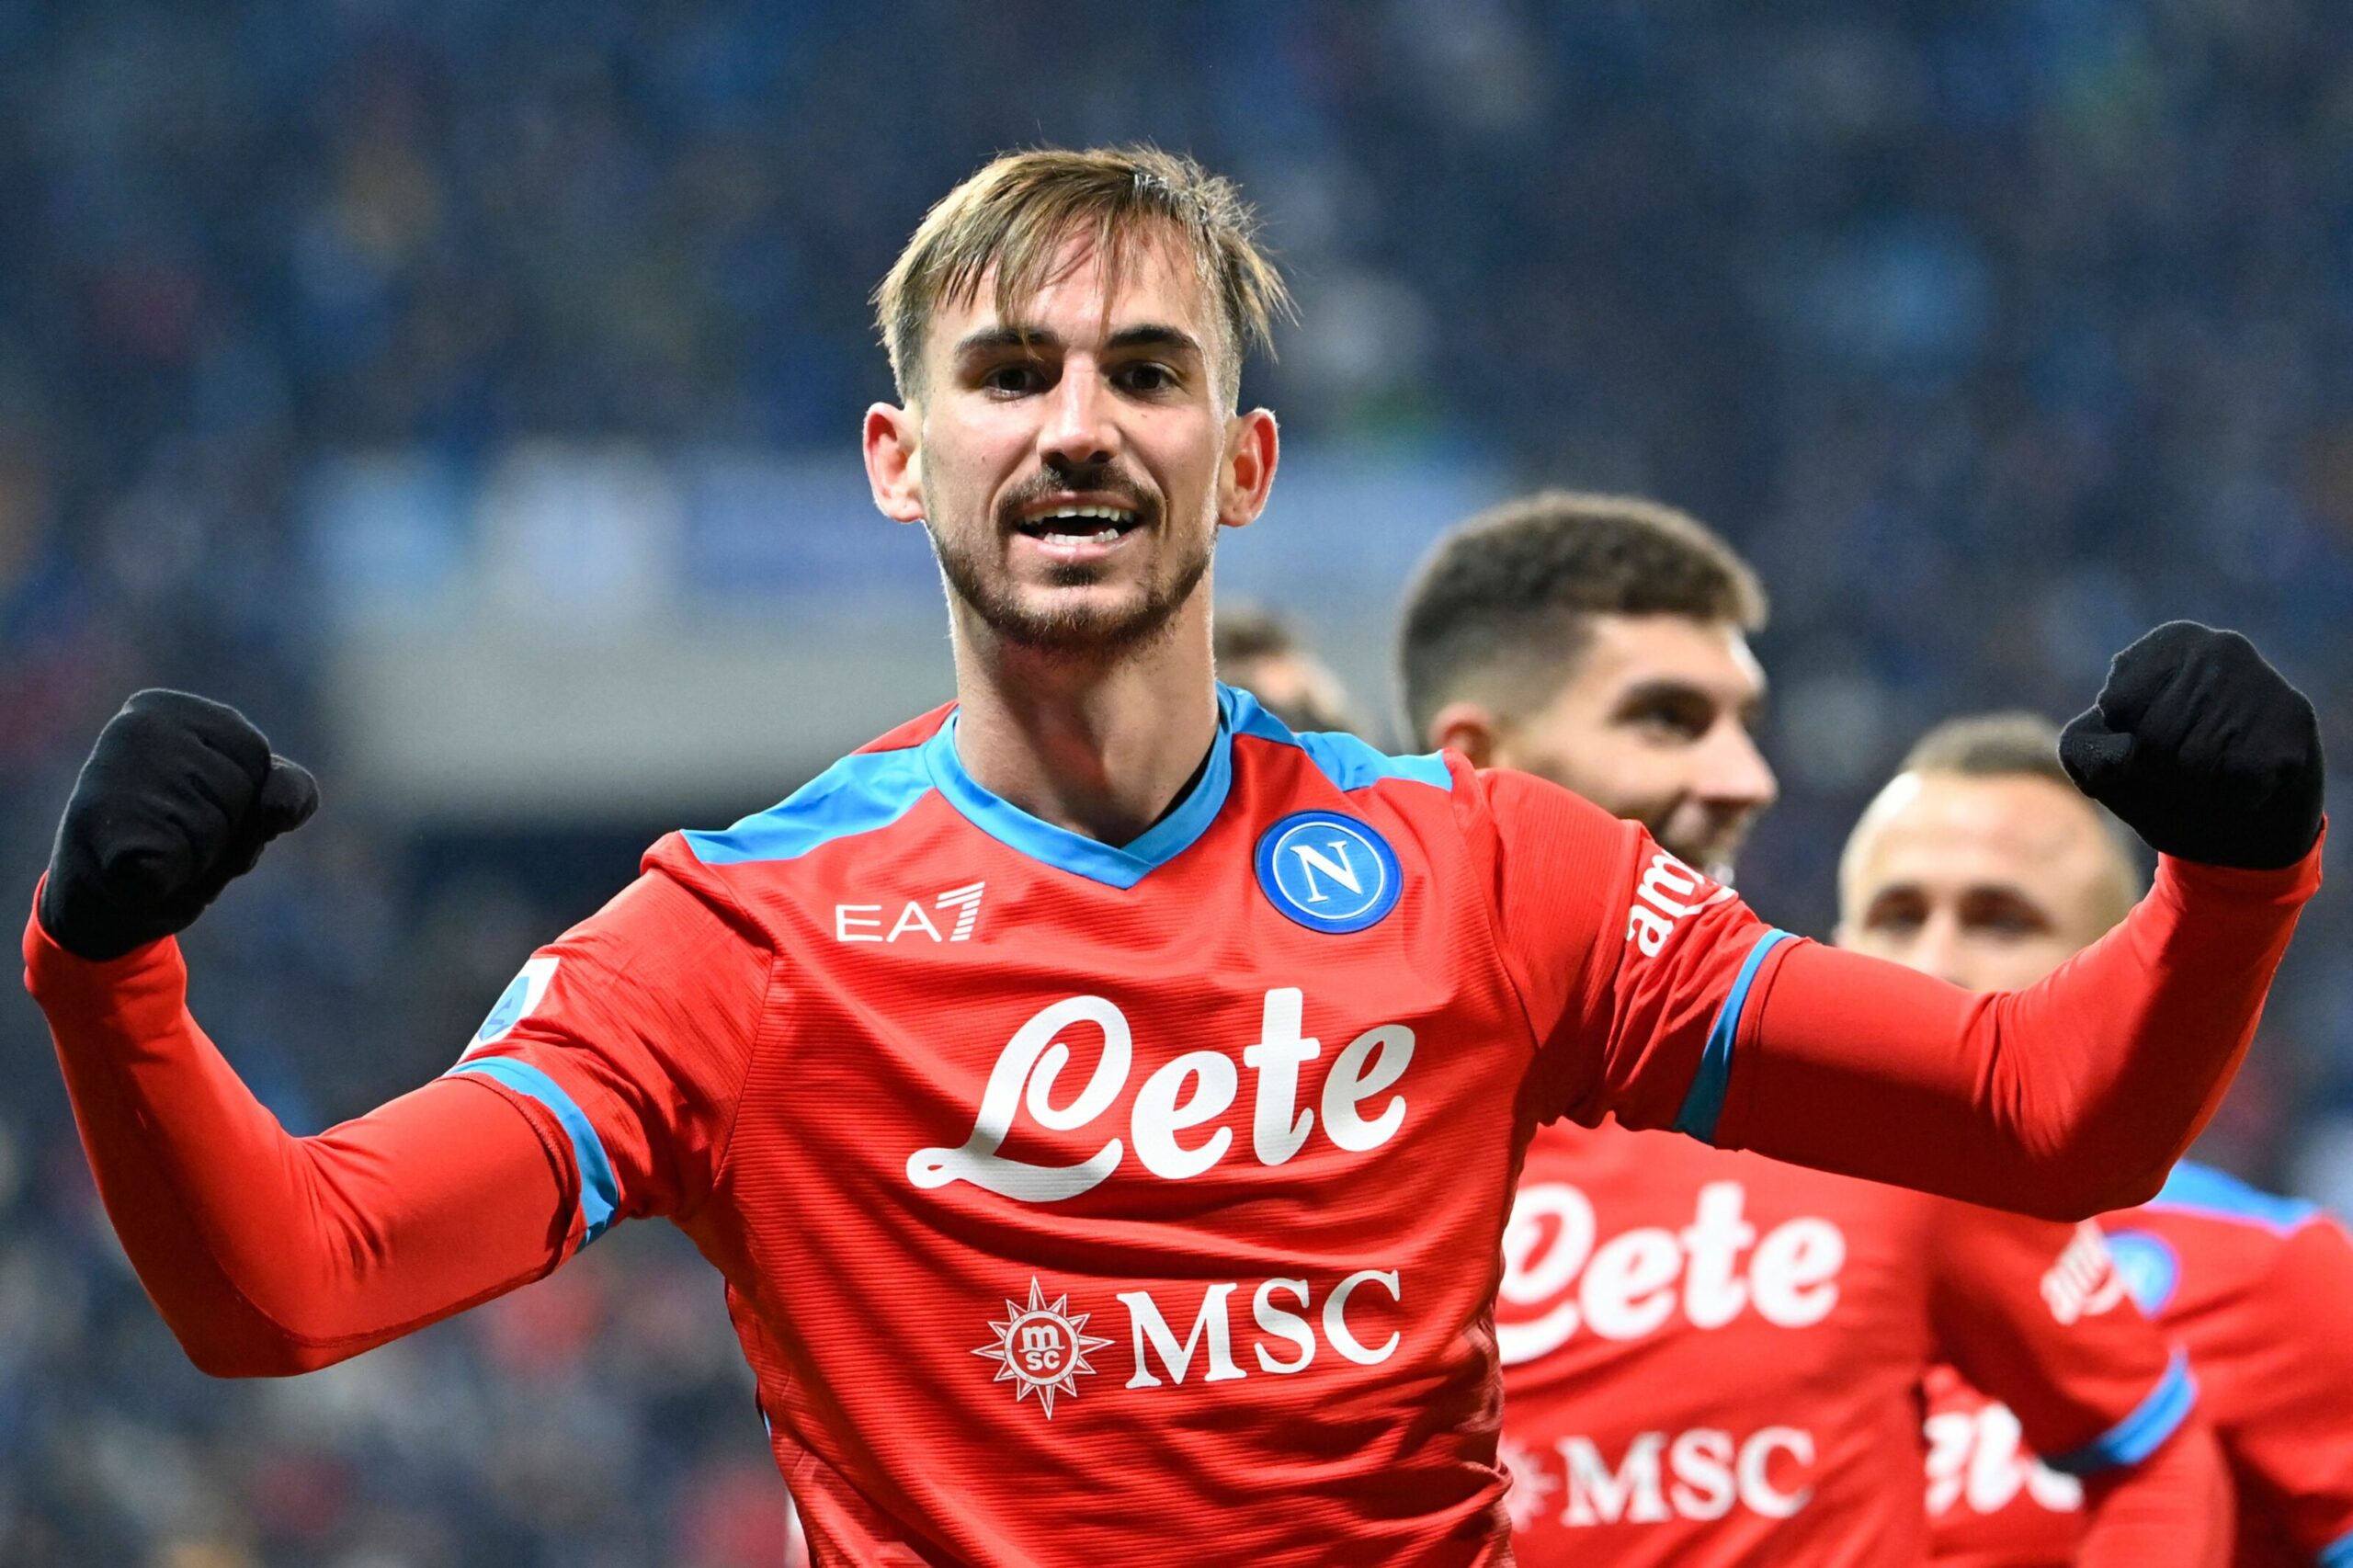 It’s official, Fabian Ruiz is a Paris Saint-Germain player. The Parisians have signed the Spanish midfielder on a five-year deal from Napoli.